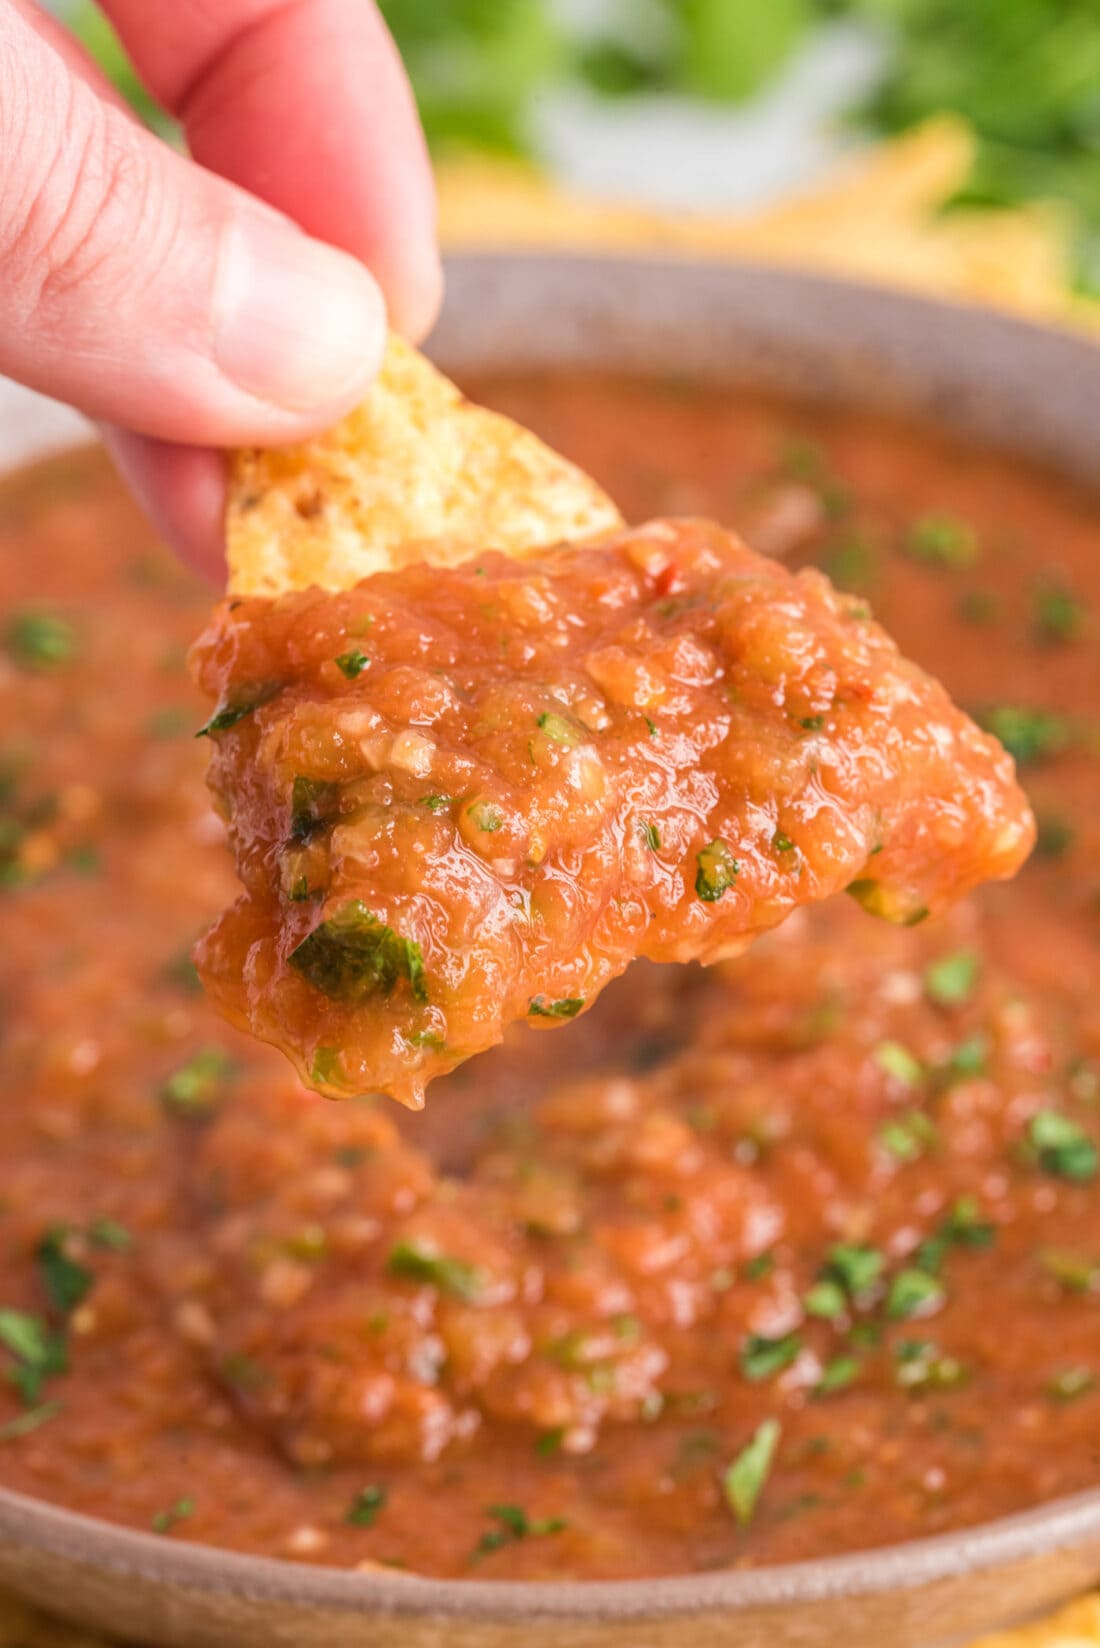 dipping a tortilla chip in Restaurant Style Salsa